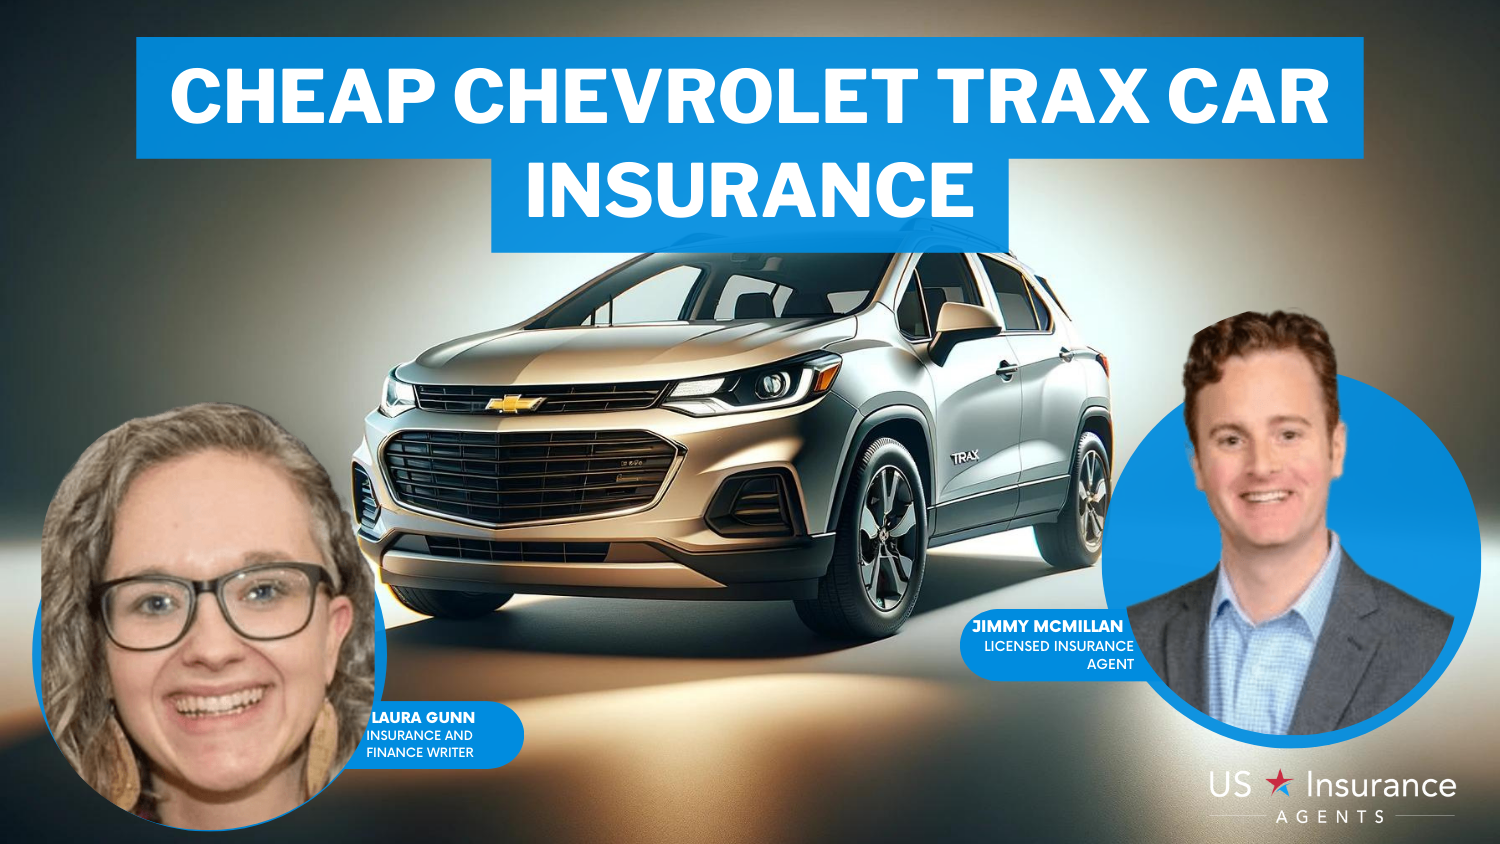 Cheap Chevrolet Trax Car Insurance: Erie, Safeco, and AAA.